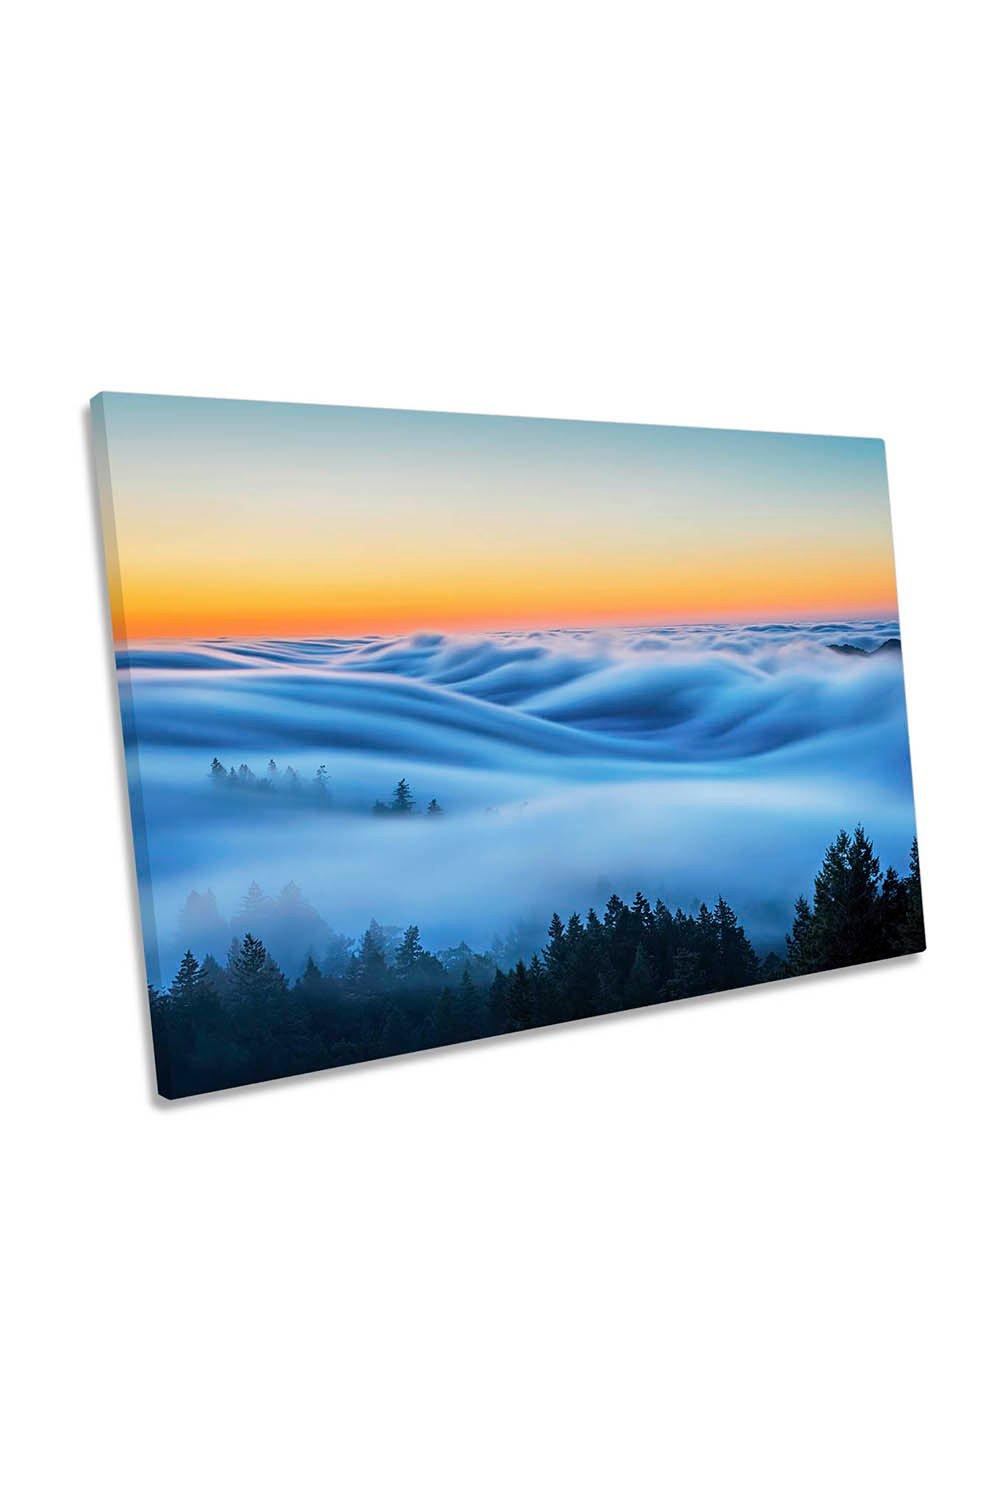 Flowing Sea of Clouds Sunrise Landscape Canvas Wall Art Picture Print